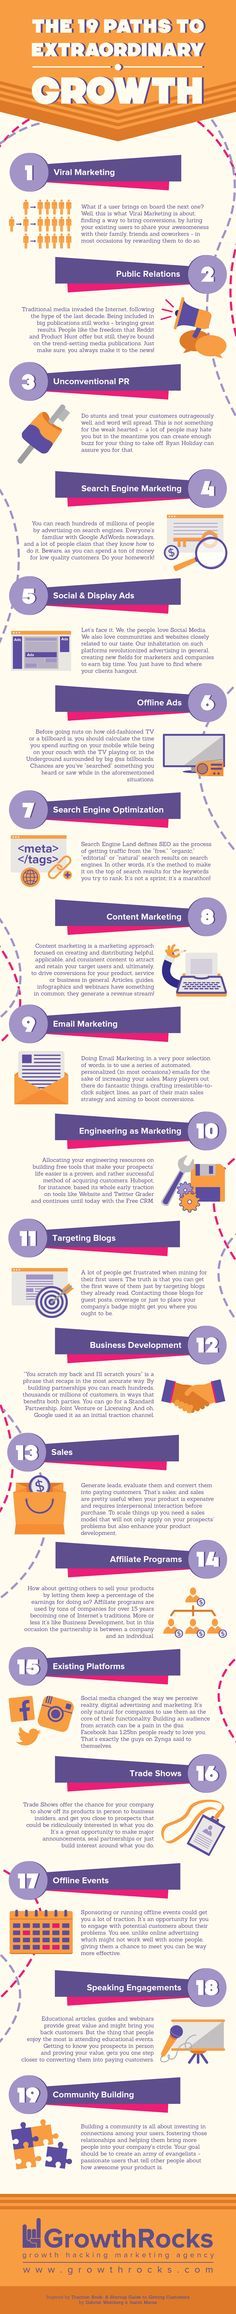 Advertising-Infographics-Digital-Marketing-Tips-The-19-Paths-To-Extraordinary-Growth Advertising Infographics : Digital Marketing Tips: The 19 Paths To Extraordinary Growth